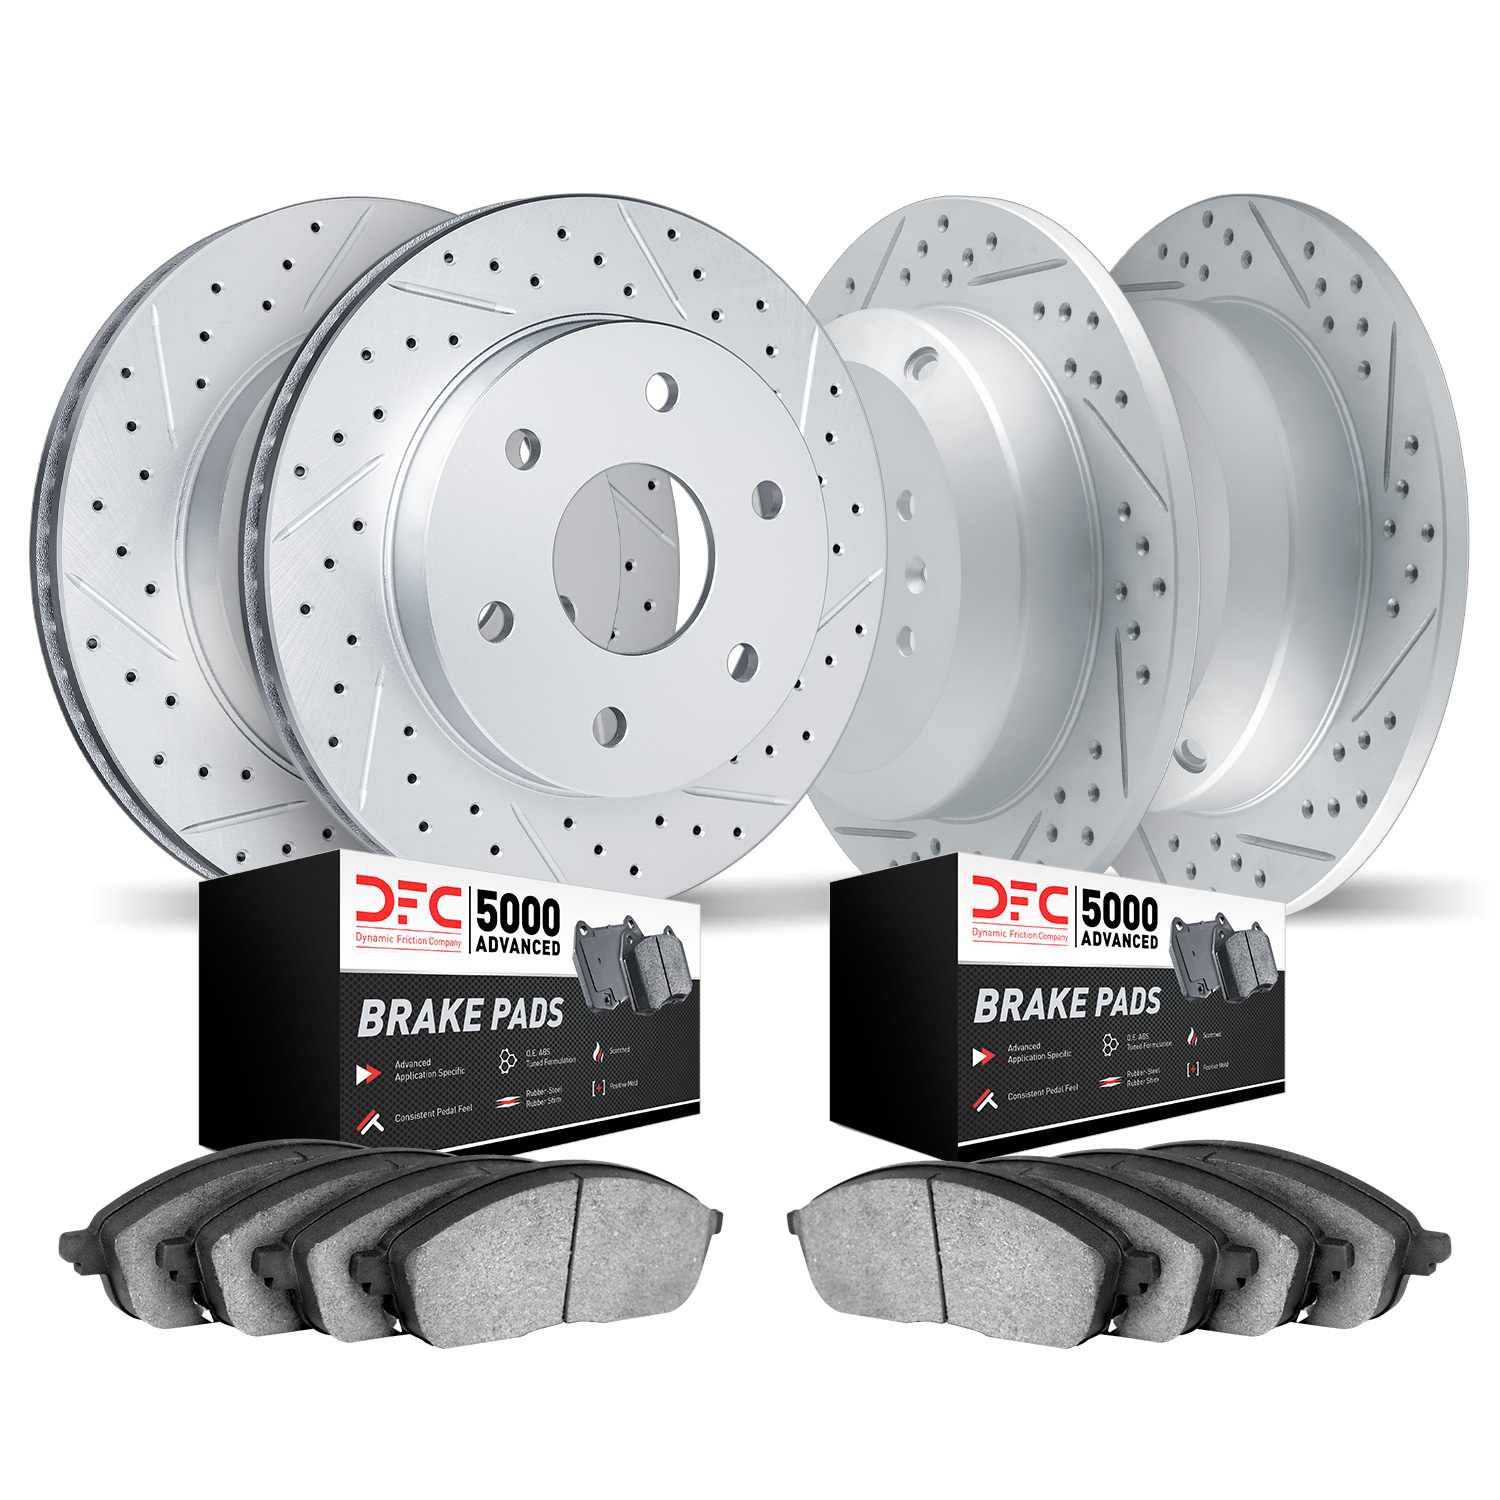 2504-93001 Geoperformance Drilled/Slotted Rotors w/5000 Advanced Brake Pads Kit, 2006-2010 GM, Position: Front and Rear